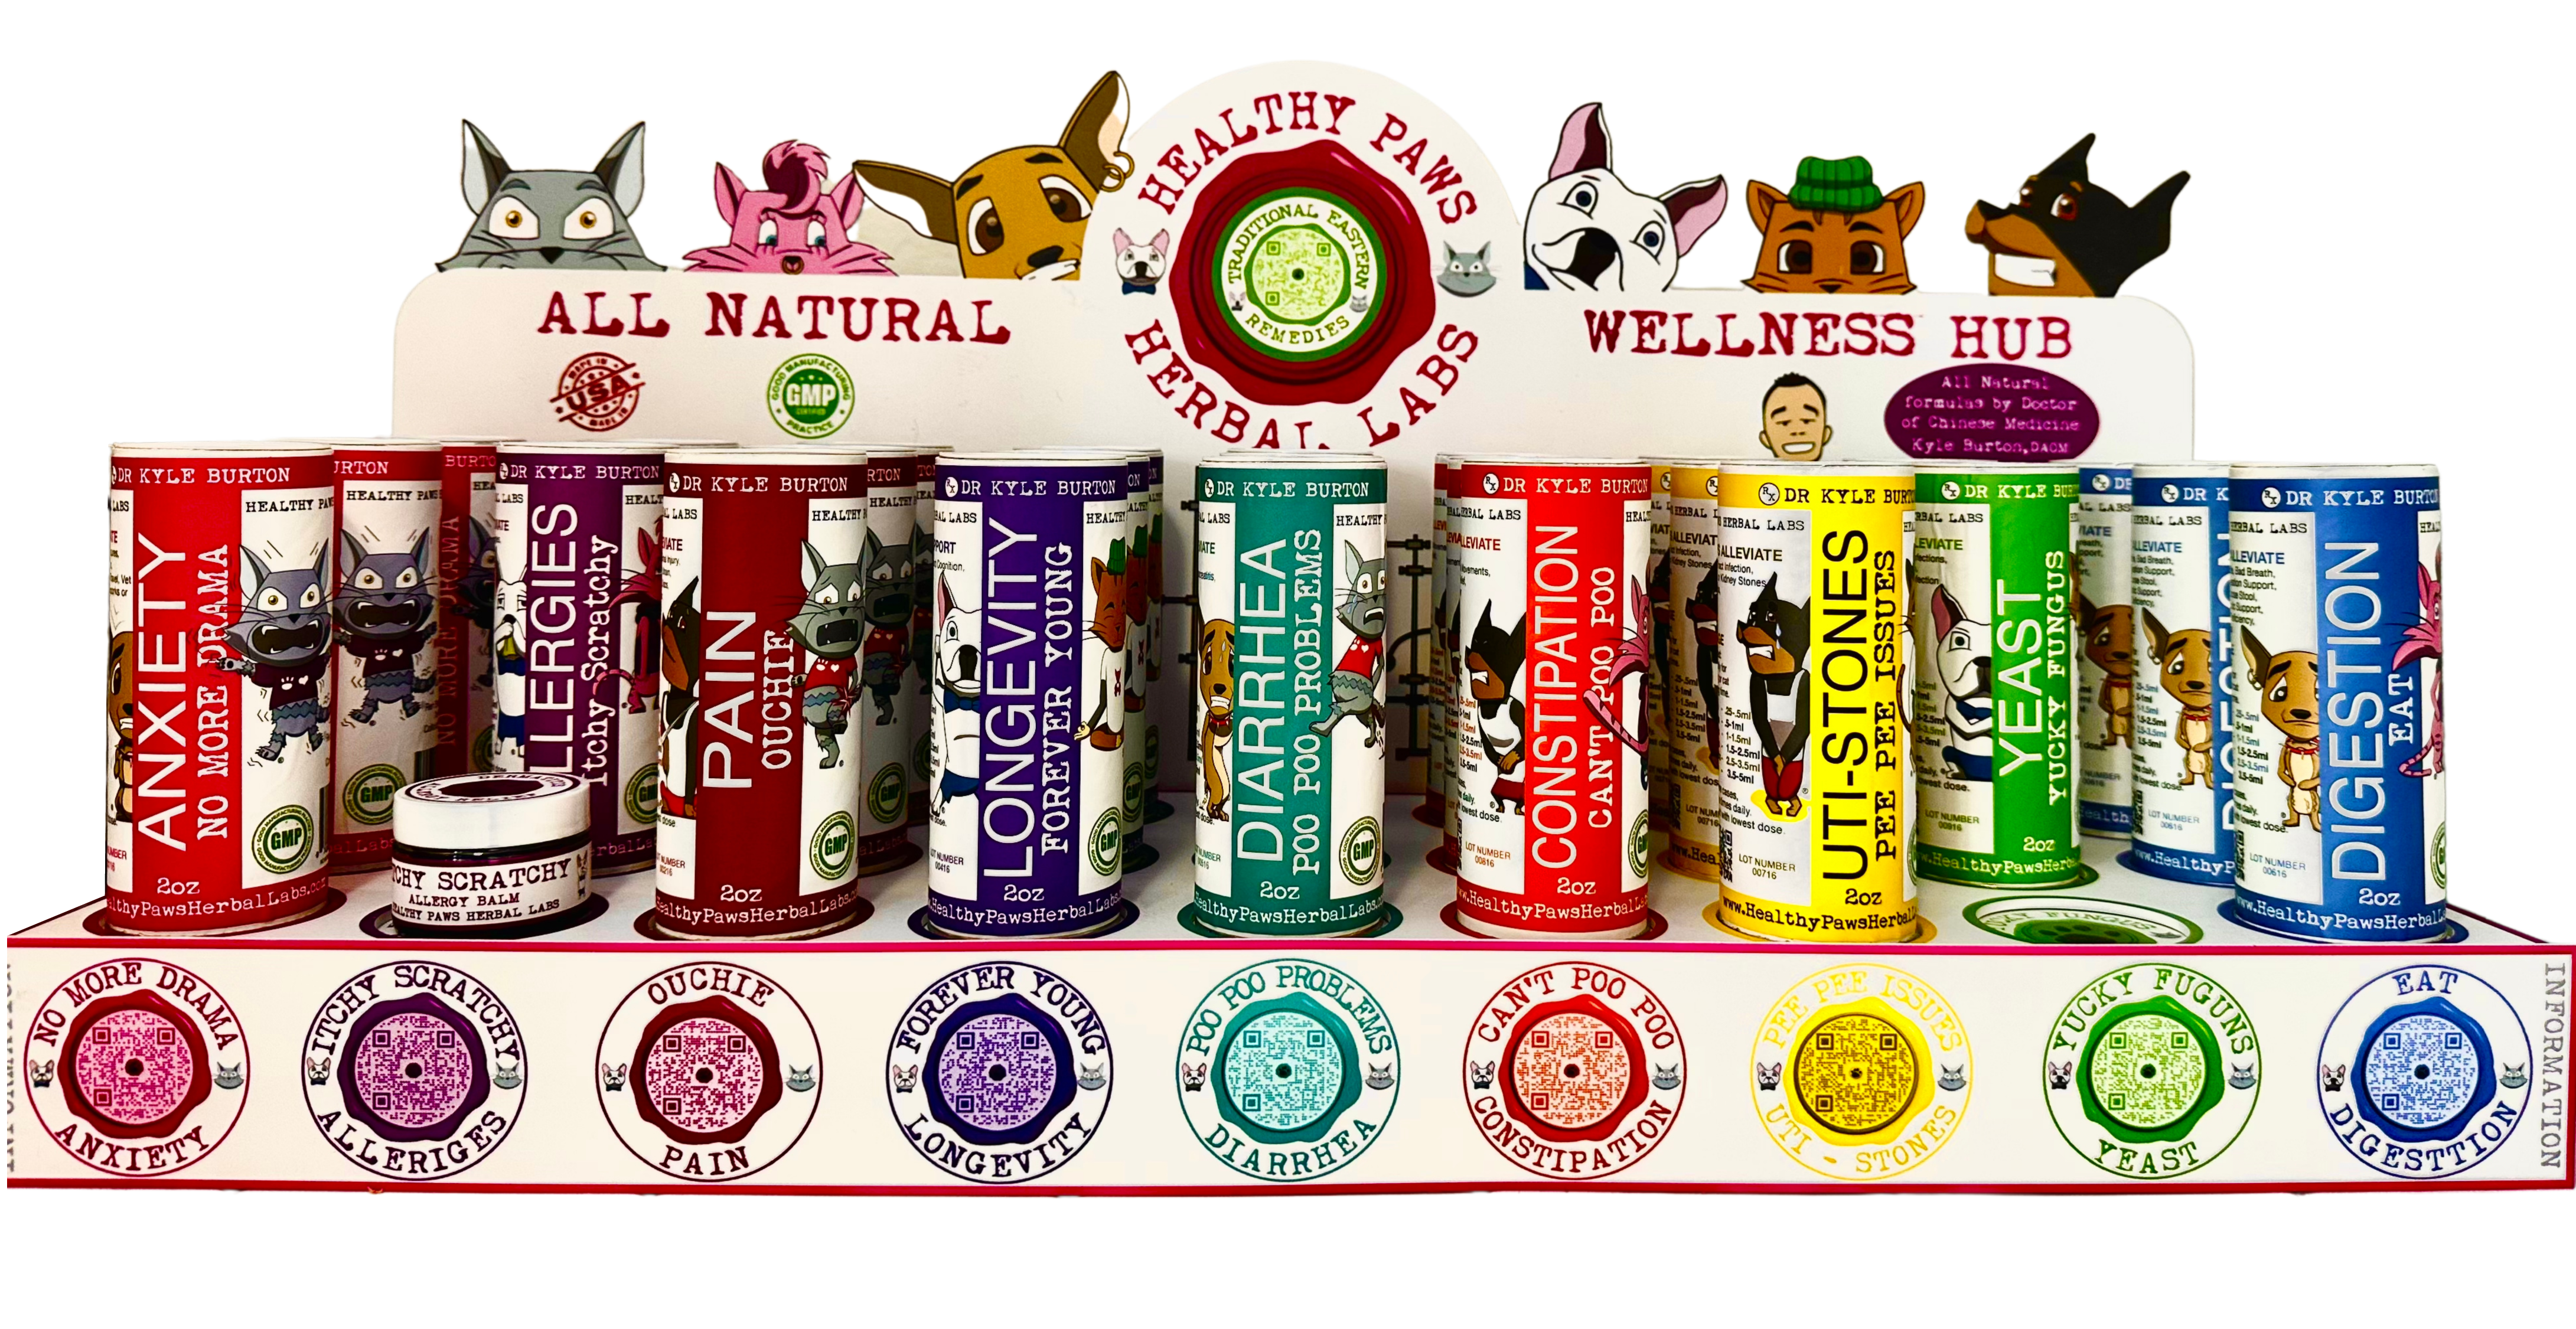 Z- Healthy Paws Herbal Lab store display with back